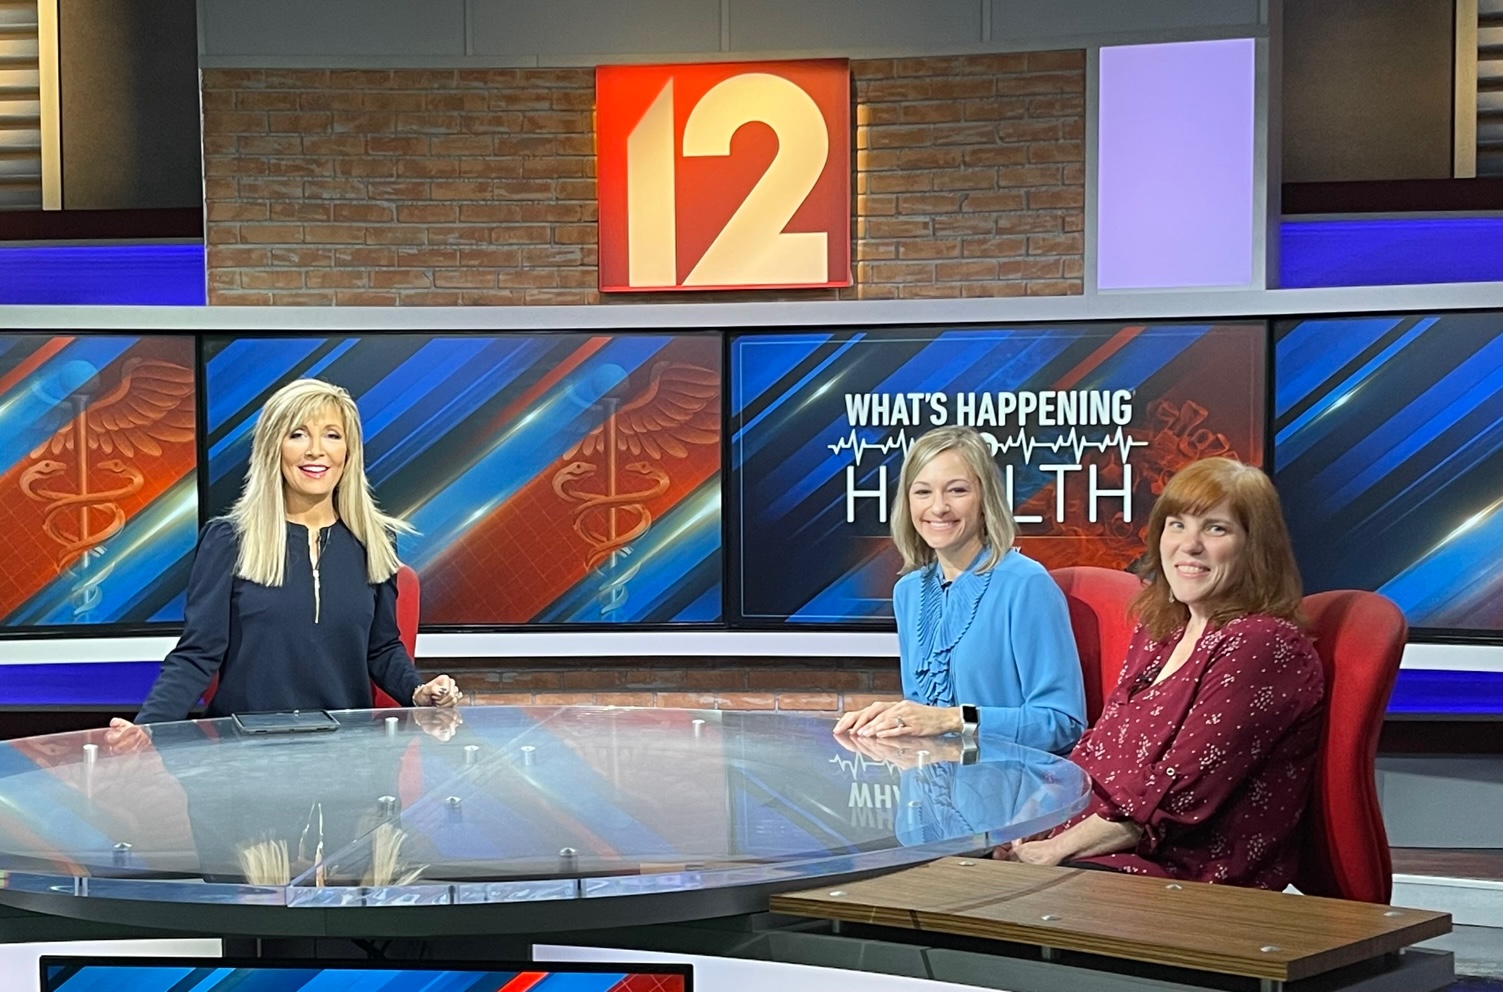 bi3 and Best Point Education and Behavioral Health discuss new grant for maternal mental healthcare on Local 12